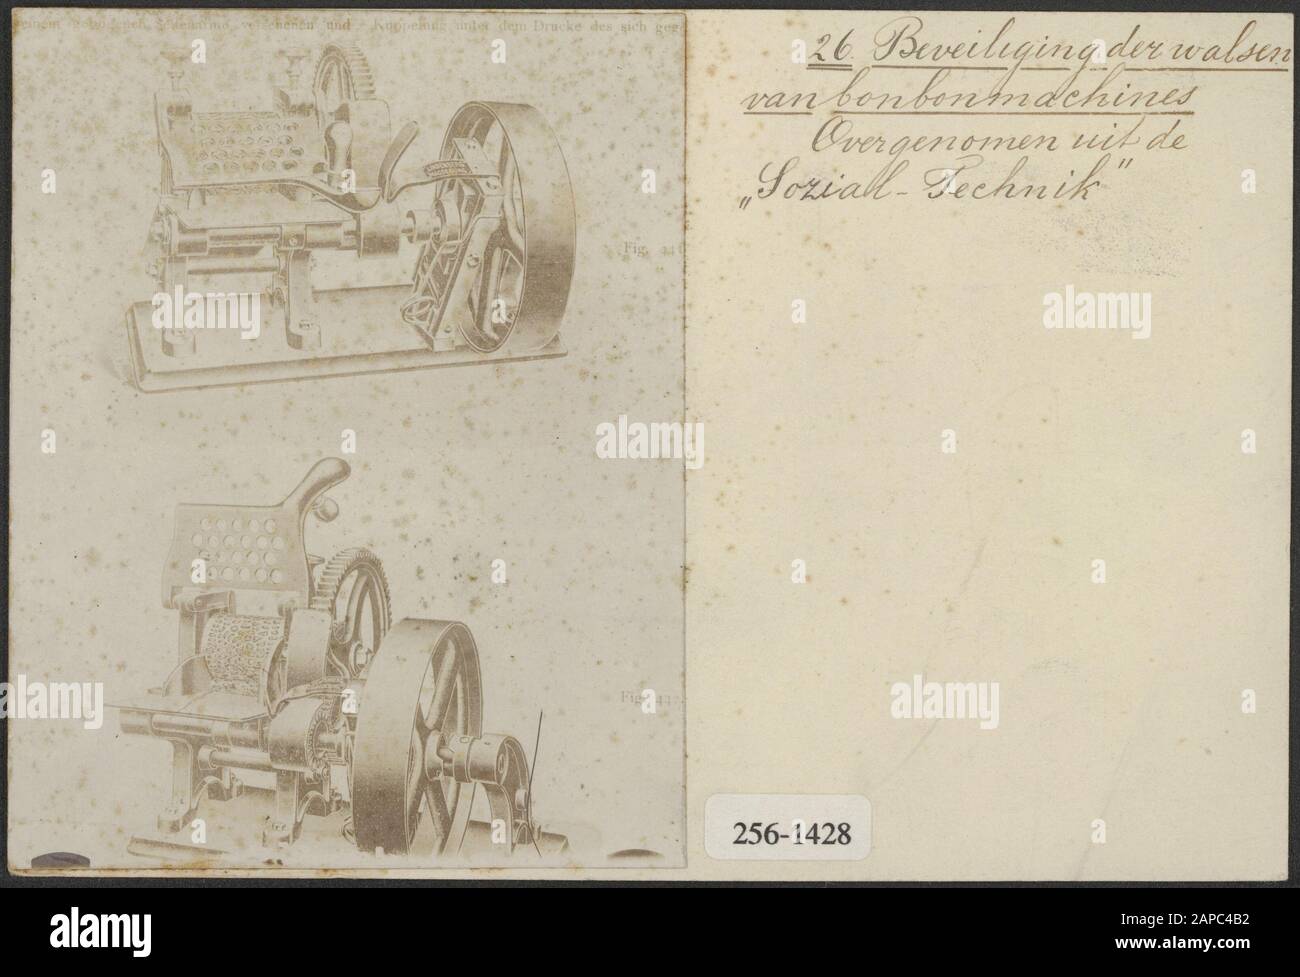 Promotion of the safety of work Description: 26. protection of the rolls of bonbonmachines; taken from 'Sozial Technik' Date: undated Keywords: security, machines, rollers Stock Photo